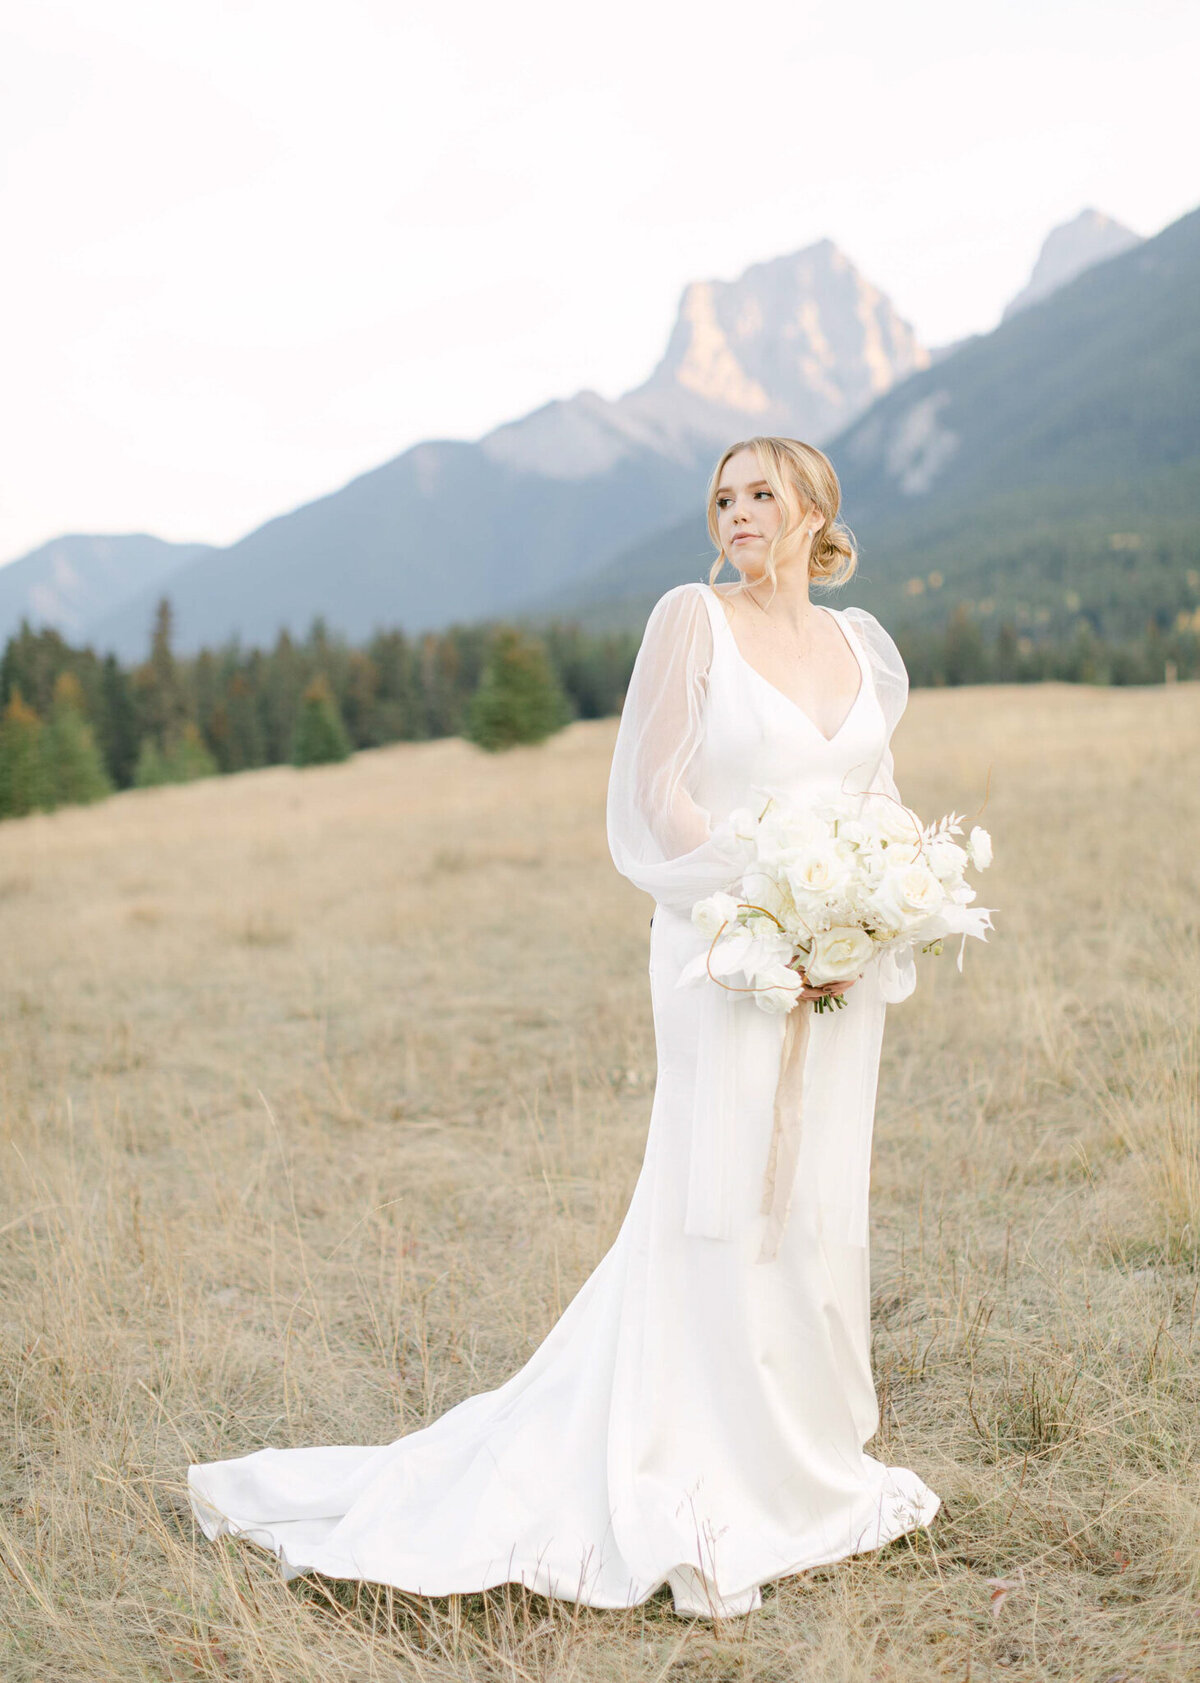 Stunning bridal portrait in the mountains by Megan Renee Photography, classic and romantic wedding photographer in Calgary, Alberta. Featured on the Bronte Bride Vendor Guide.